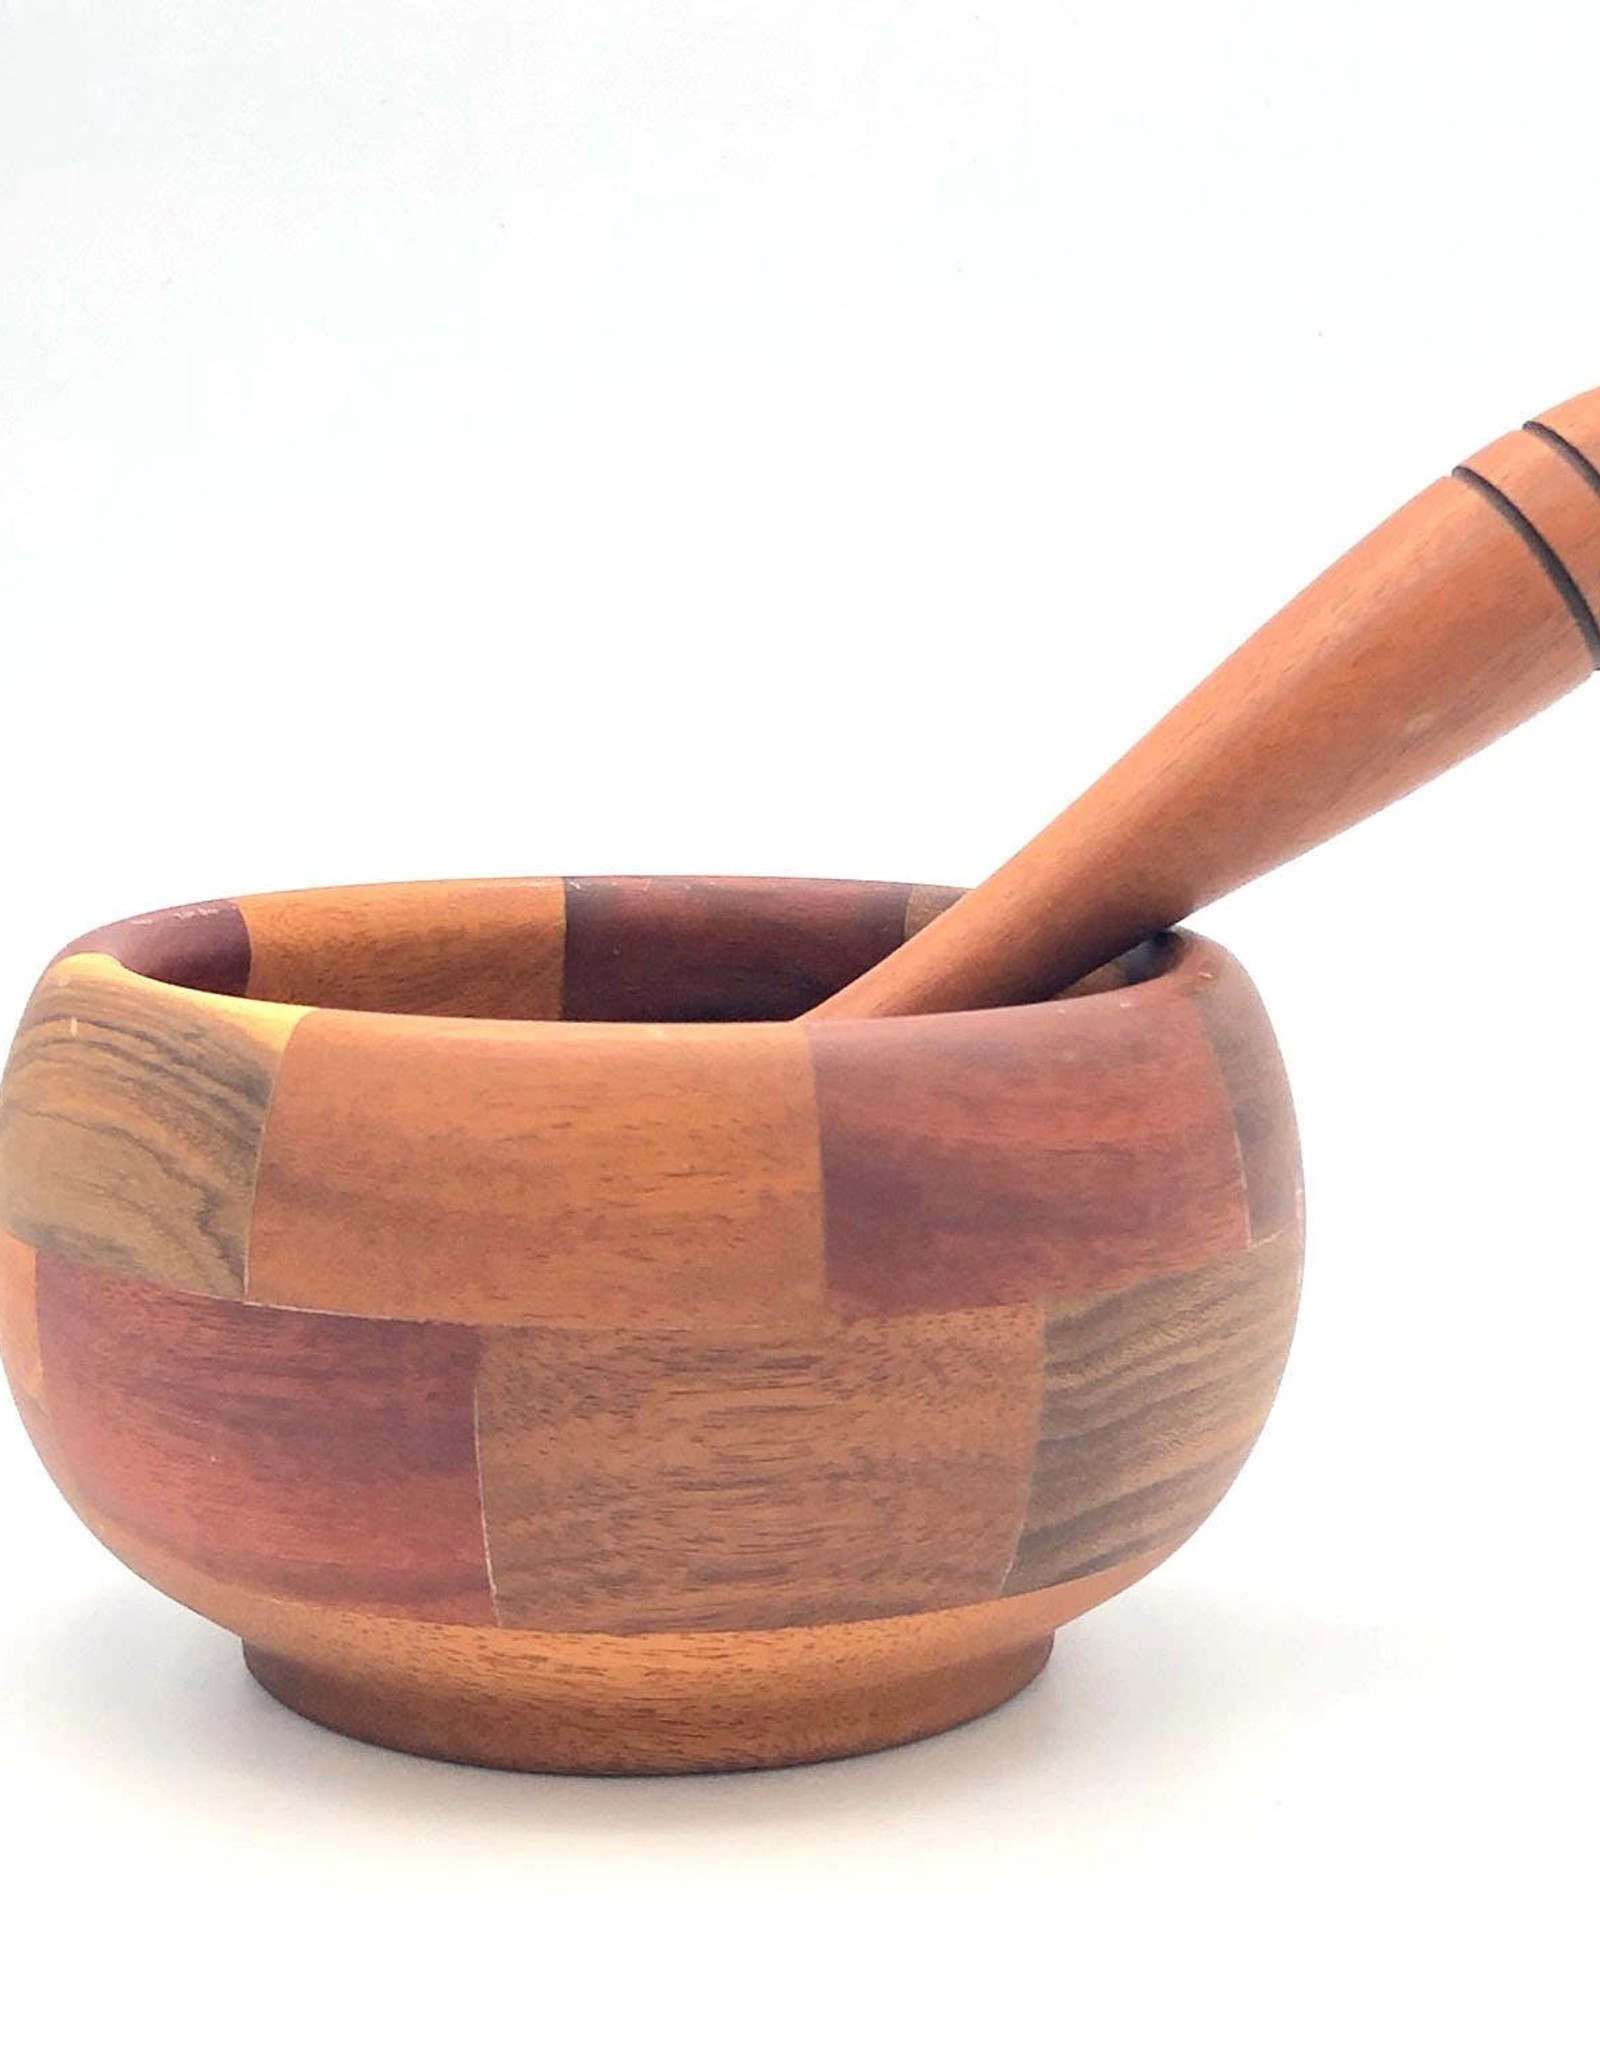 Women of the Cloud Forest Tropical Hardwood Mortar & Pestle - Multi-Wood